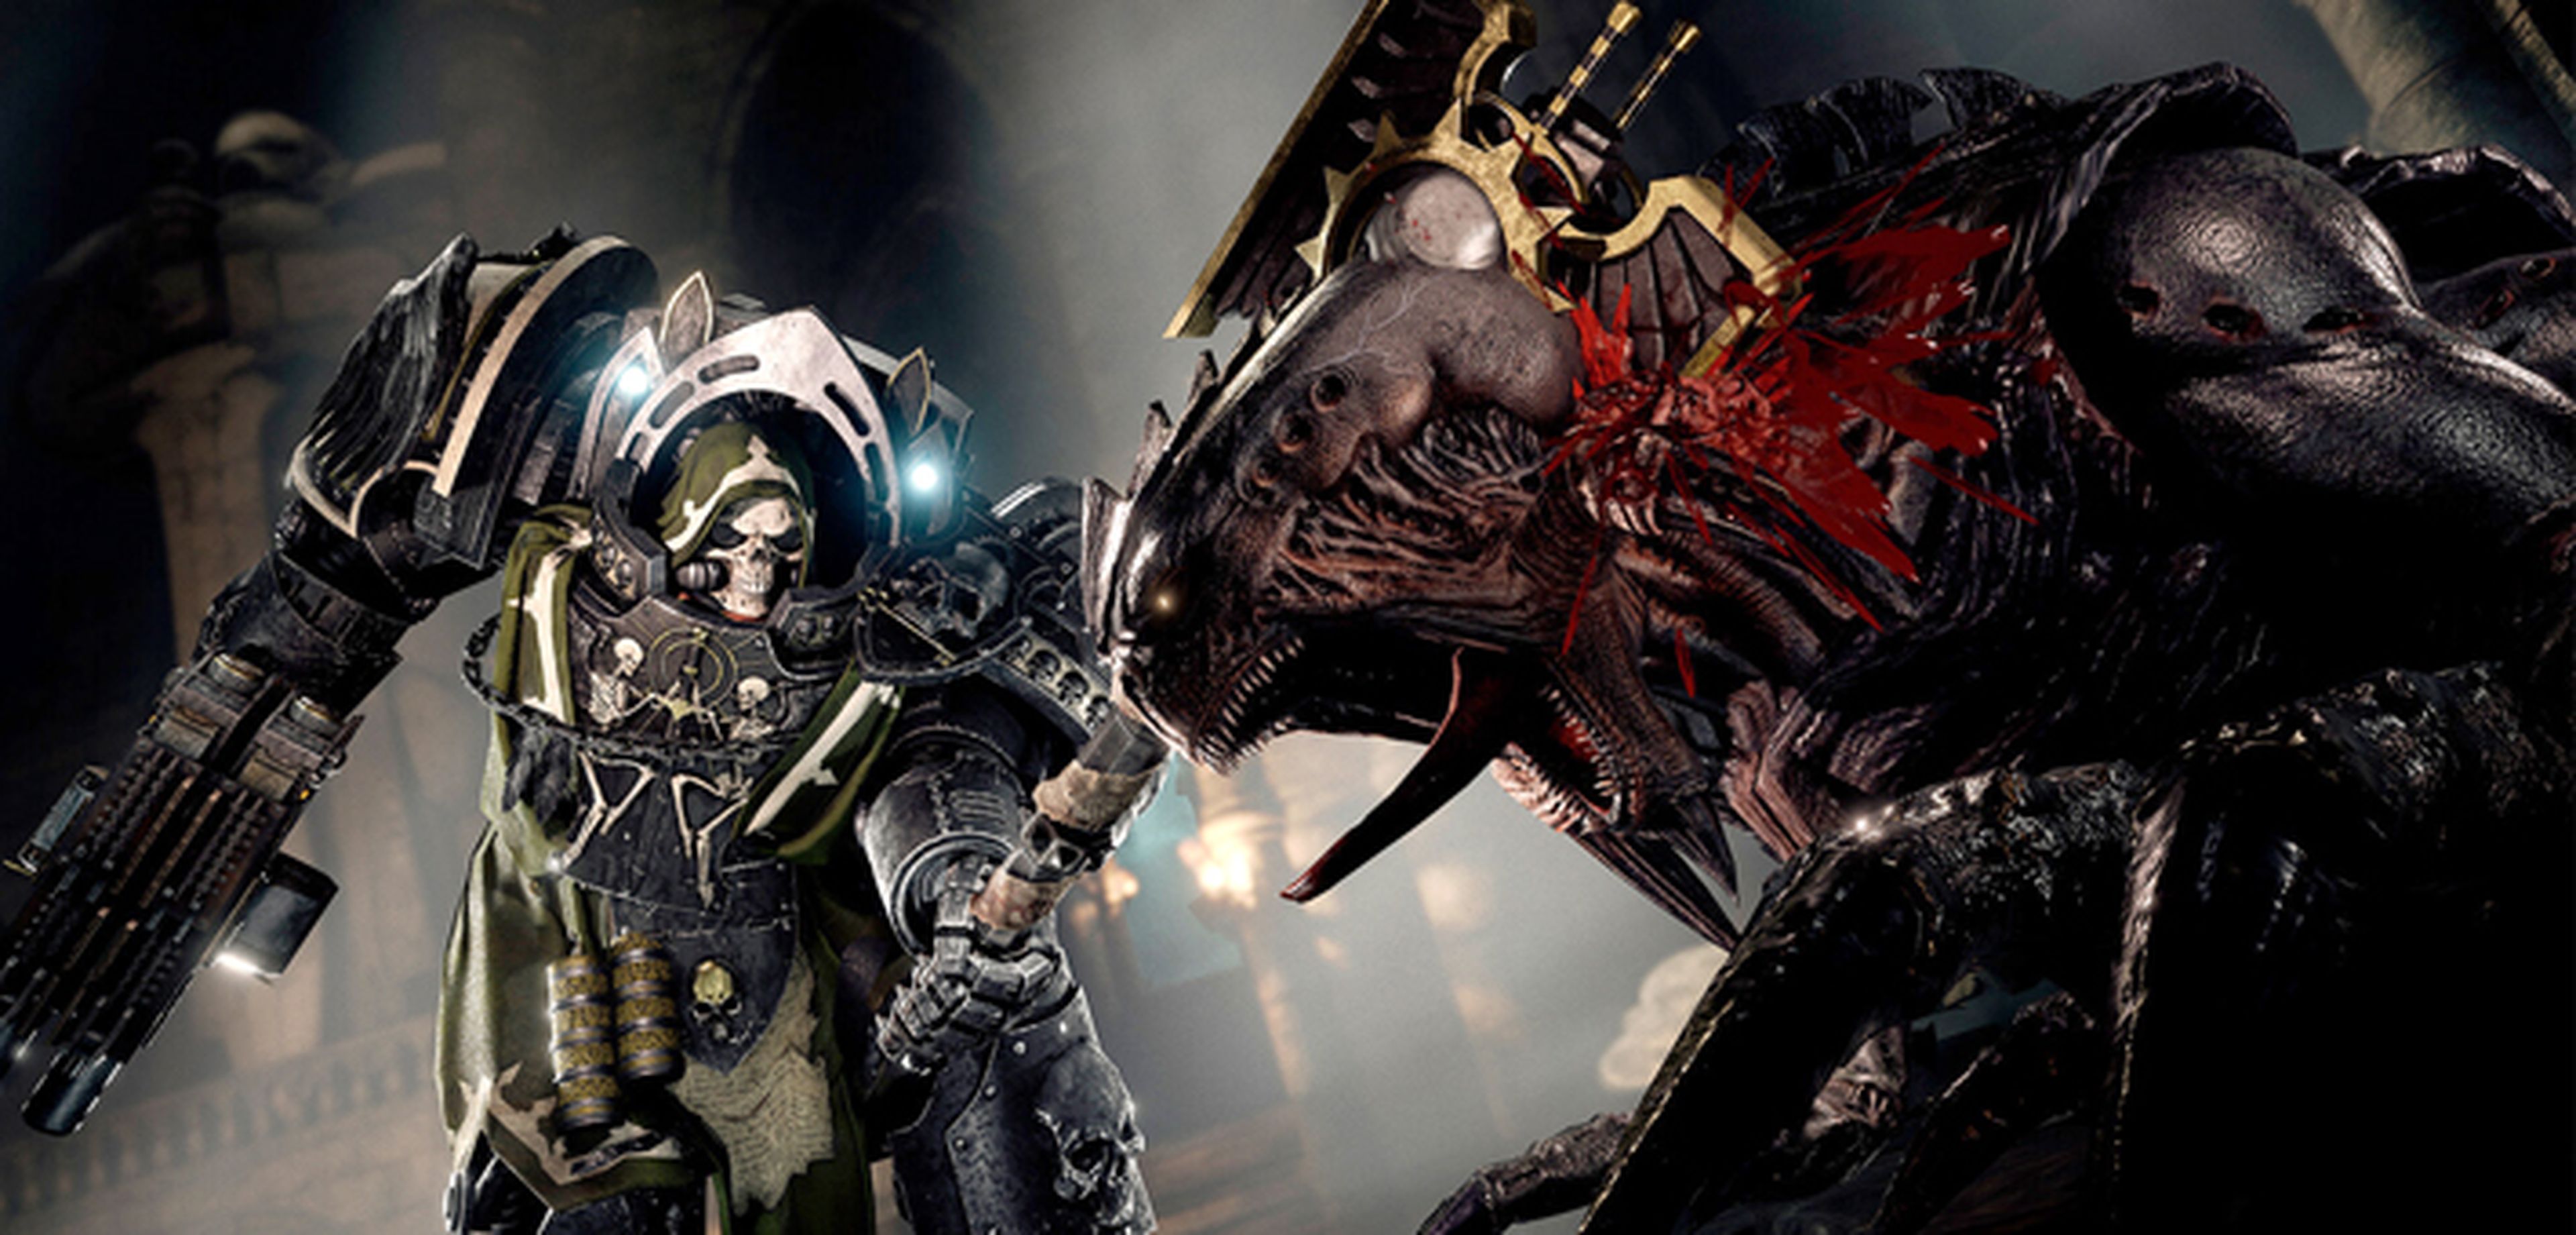 Space Hulk Deathwing Definitive Edition